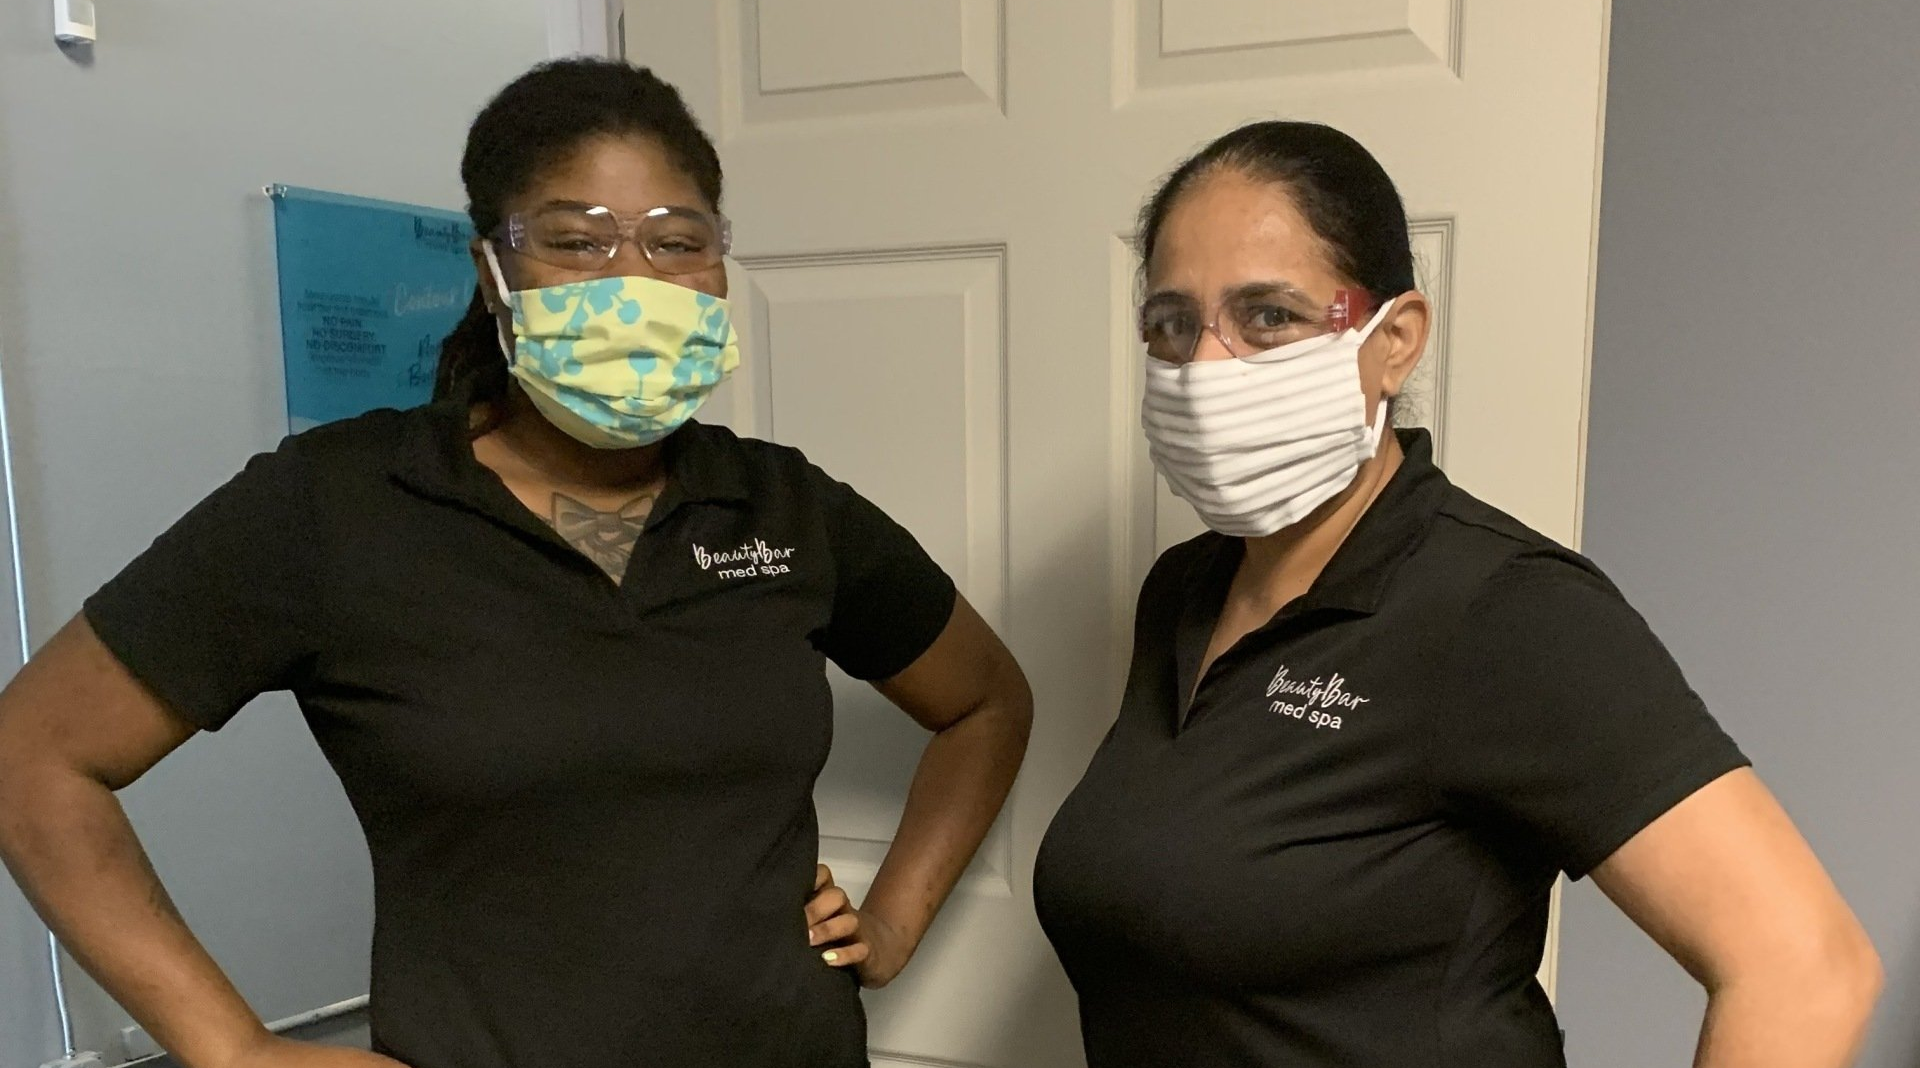 Two women wearing face masks are standing next to each other